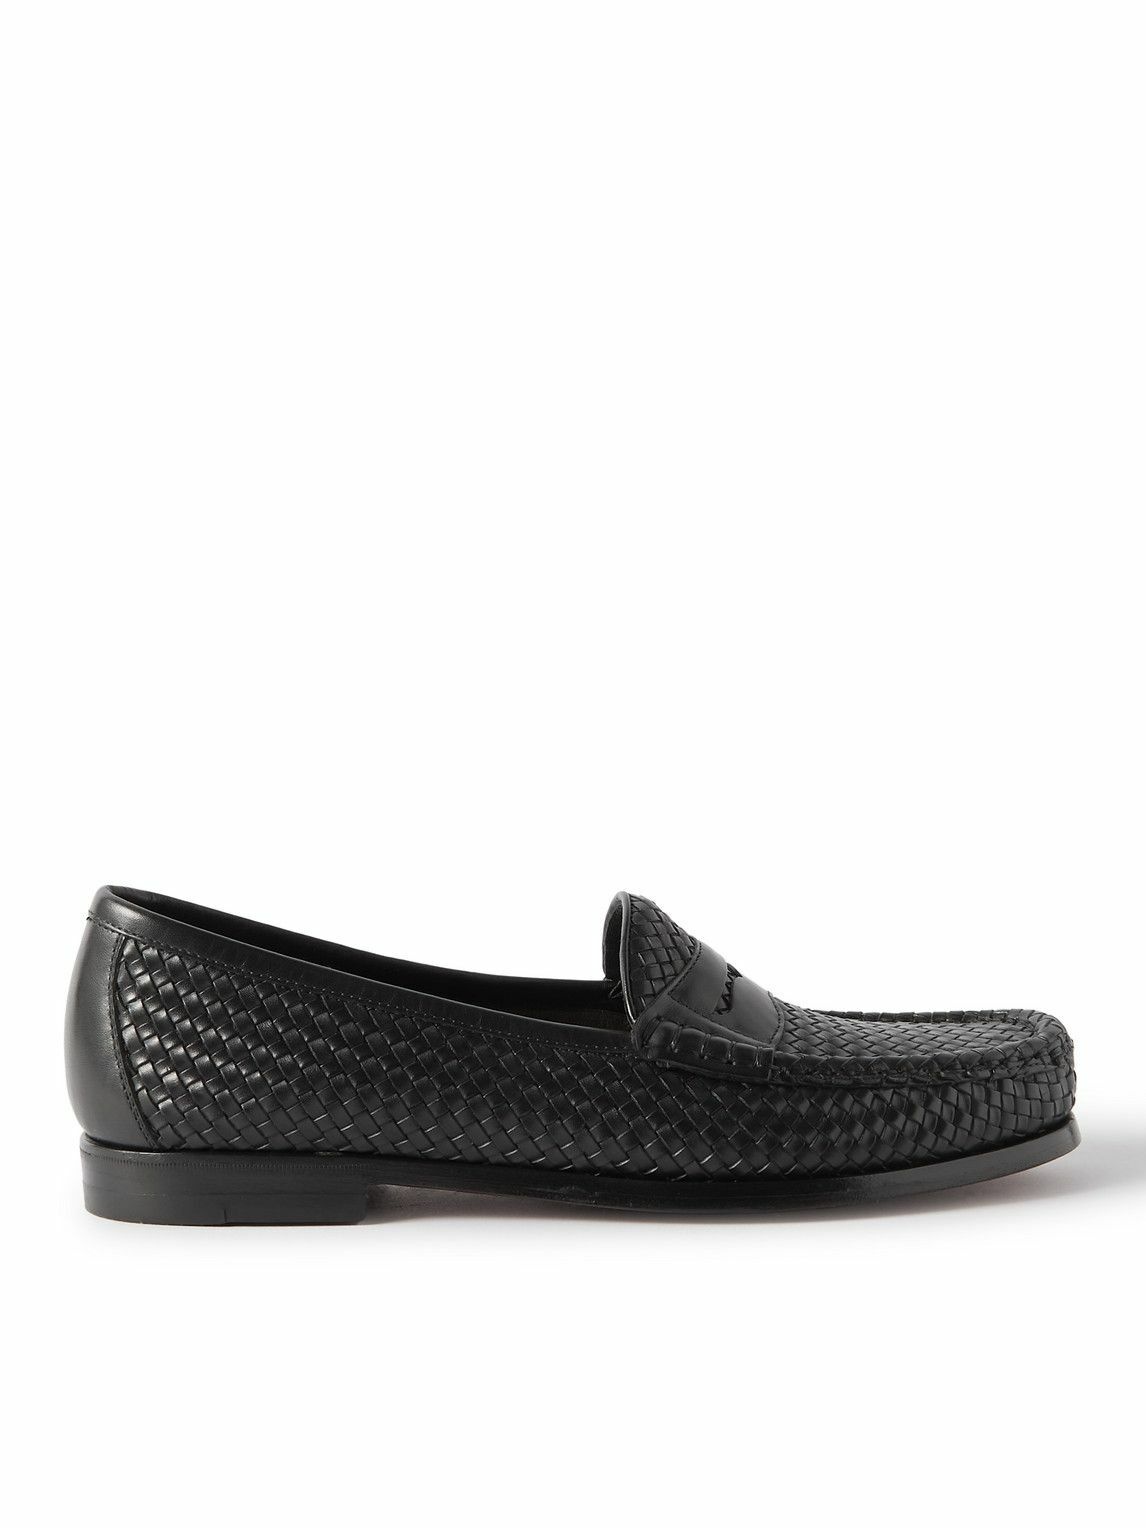 TOM FORD - Neville Woven Leather Loafers - Black TOM FORD